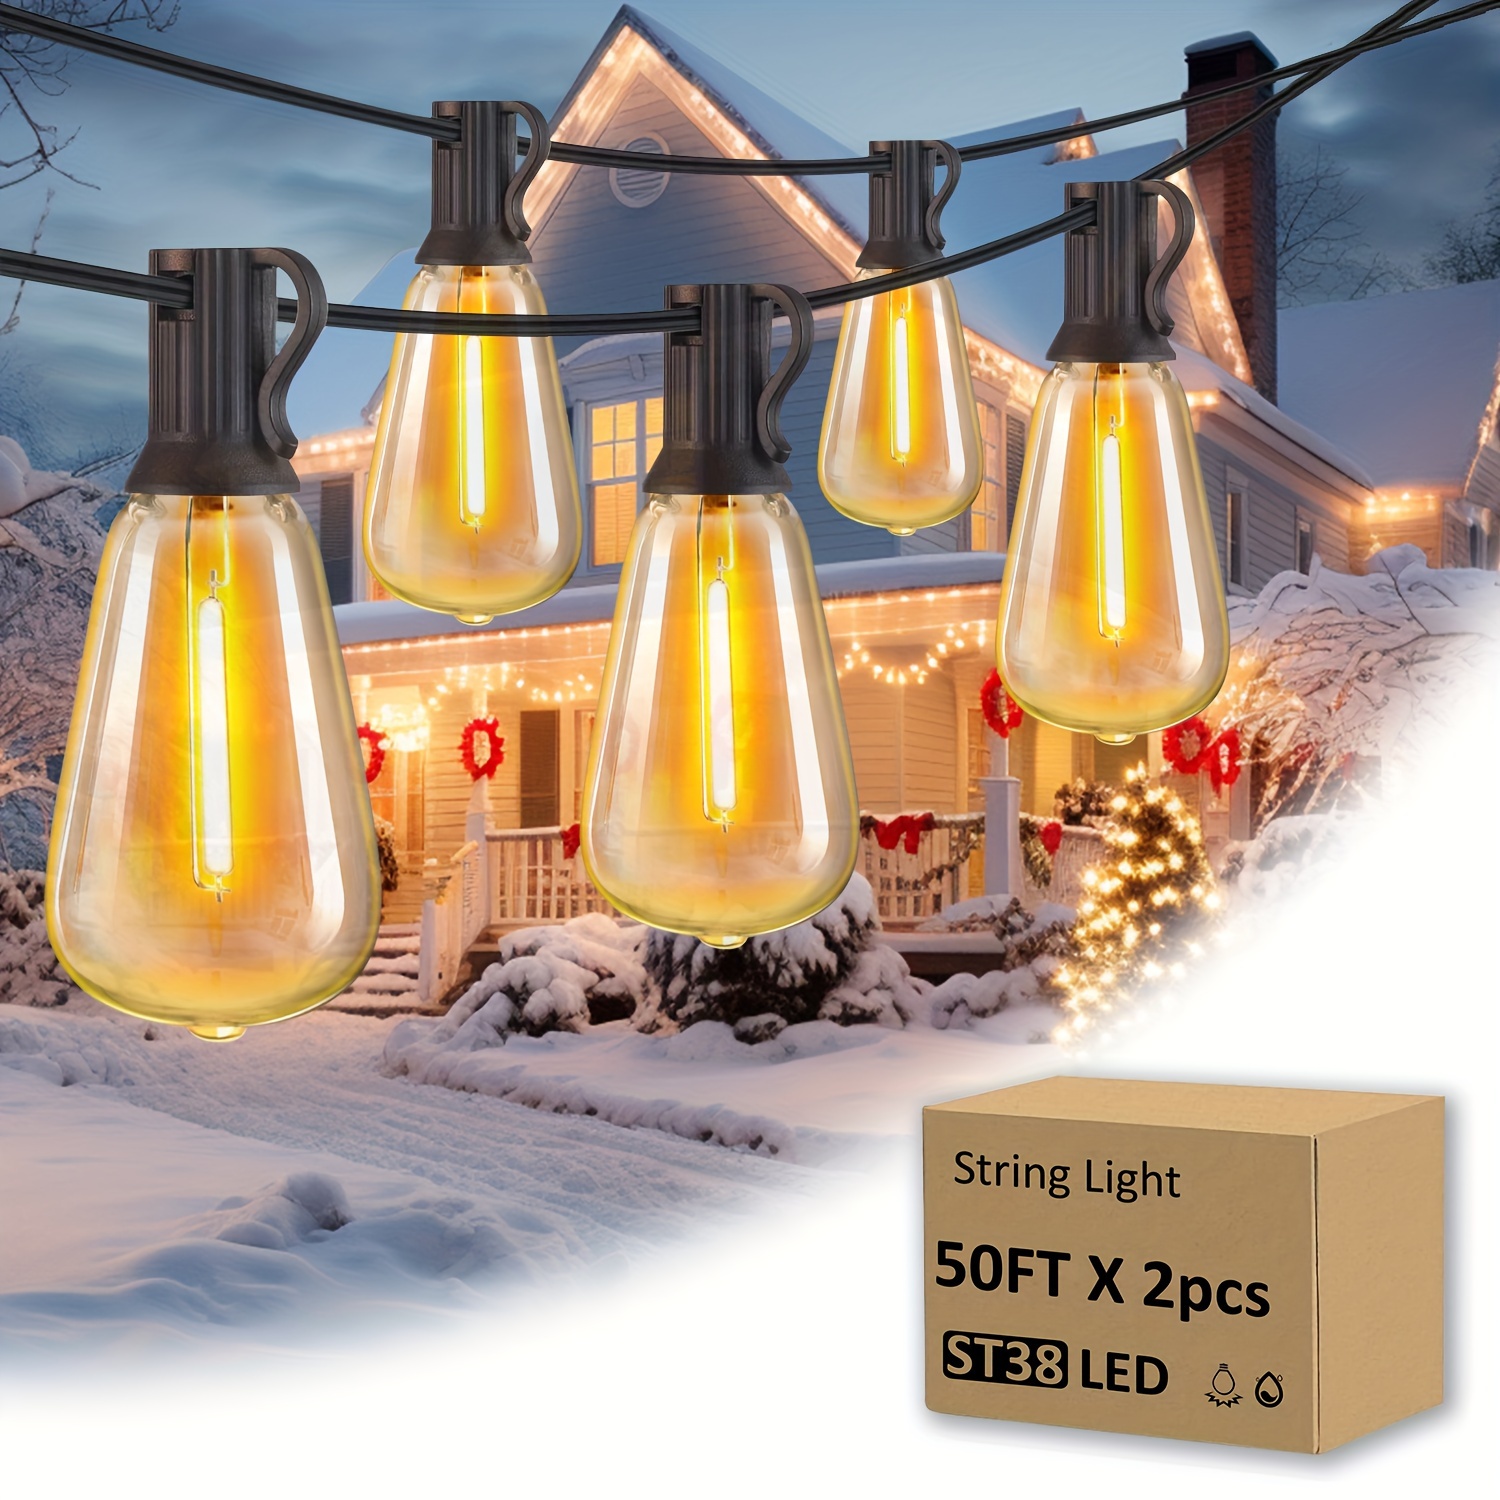 

50ft/100ft/150ft Led Outdoor String St38 Vintage Edison Bulbs, Outside Hanging Lights Waterproof For Porch, Deck, Garden, Backyard, Balcony, Patio, Christmas Lights, 2700k Dimmable